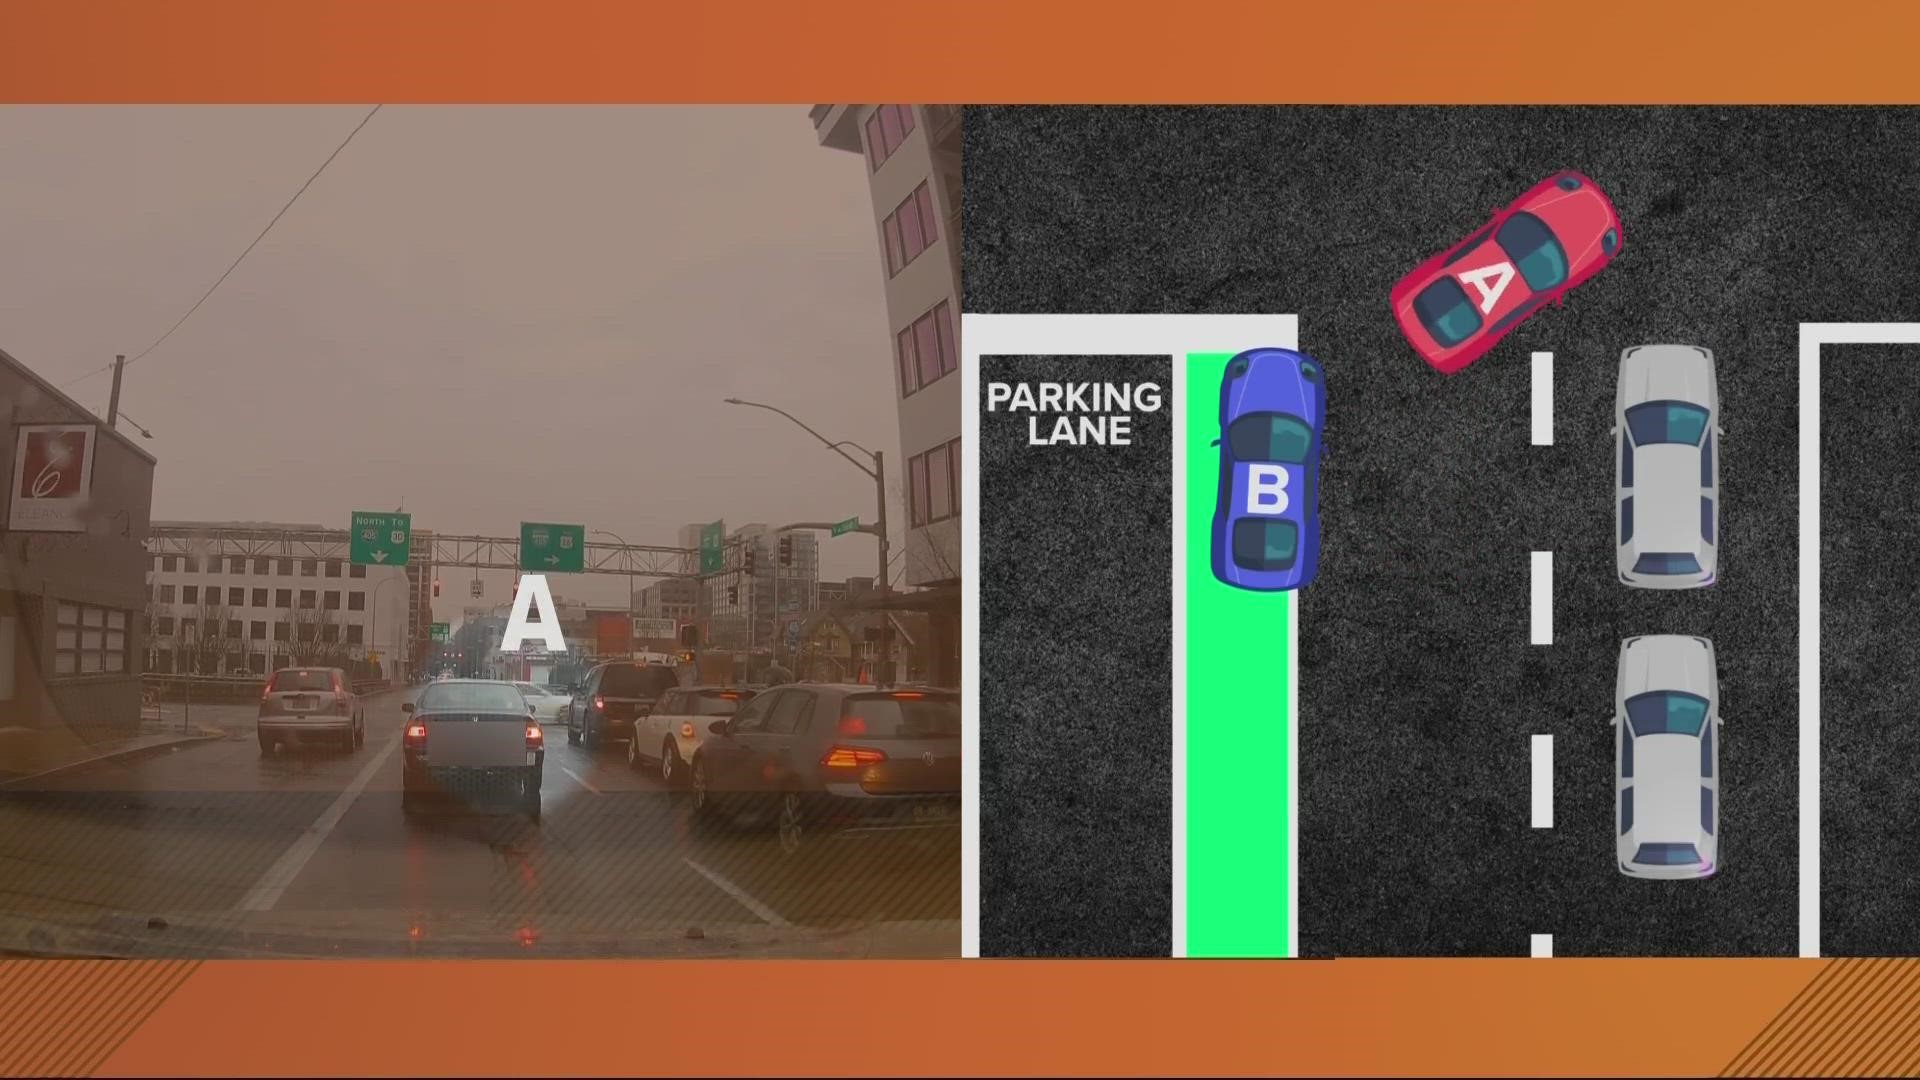 KGW's Chris McGinness shares a video of an illegal turn in the latest installment of "Driving Me Crazy," a series about things that drive people nuts on the roads.